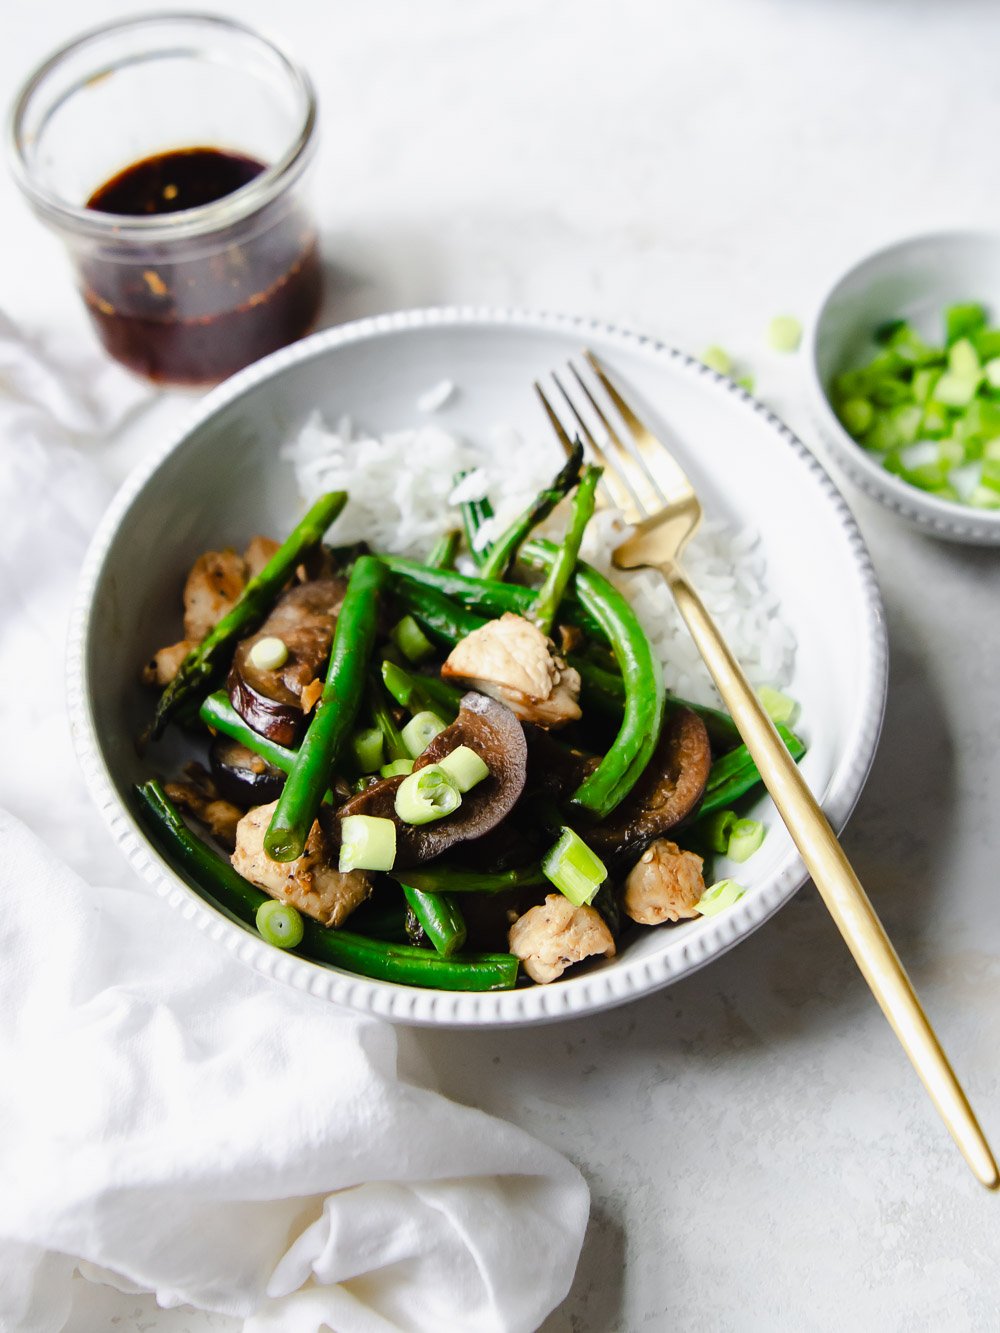 Healthy and easy chicken stir fry made with gorgeous vegetables such as green beans, egg plant and asparagus mixed with a garlic ginger (no soy) stir fry sauce